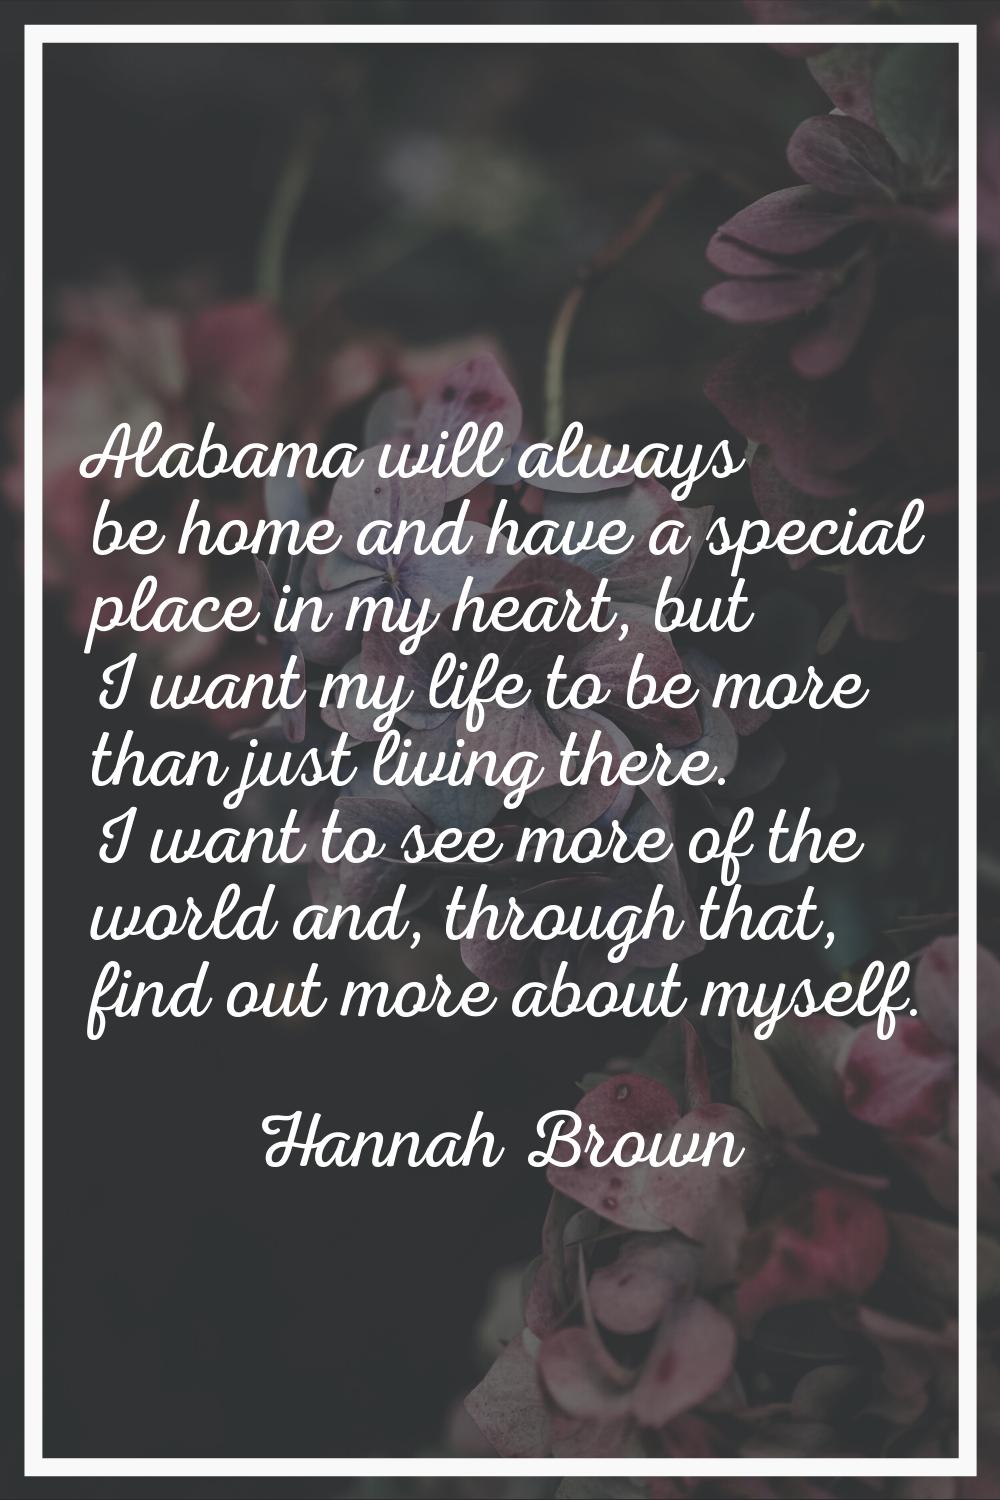 Alabama will always be home and have a special place in my heart, but I want my life to be more tha